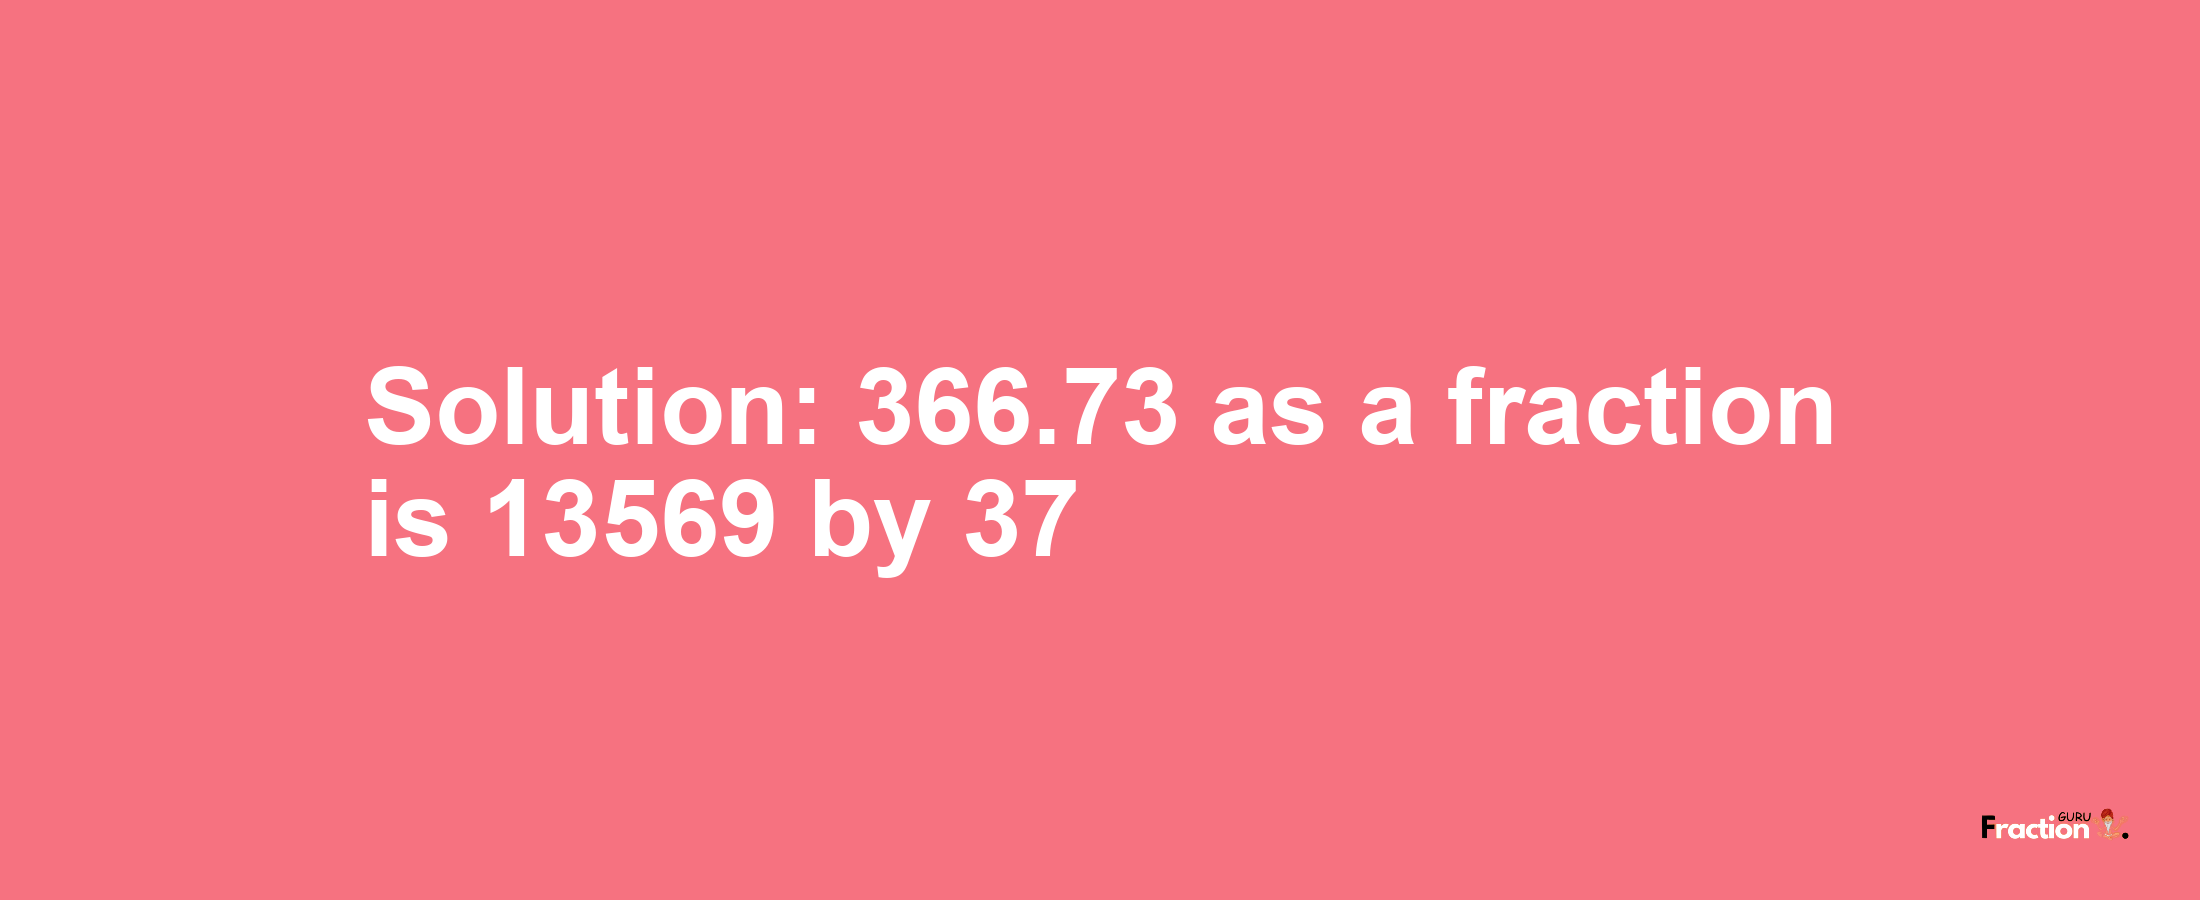 Solution:366.73 as a fraction is 13569/37